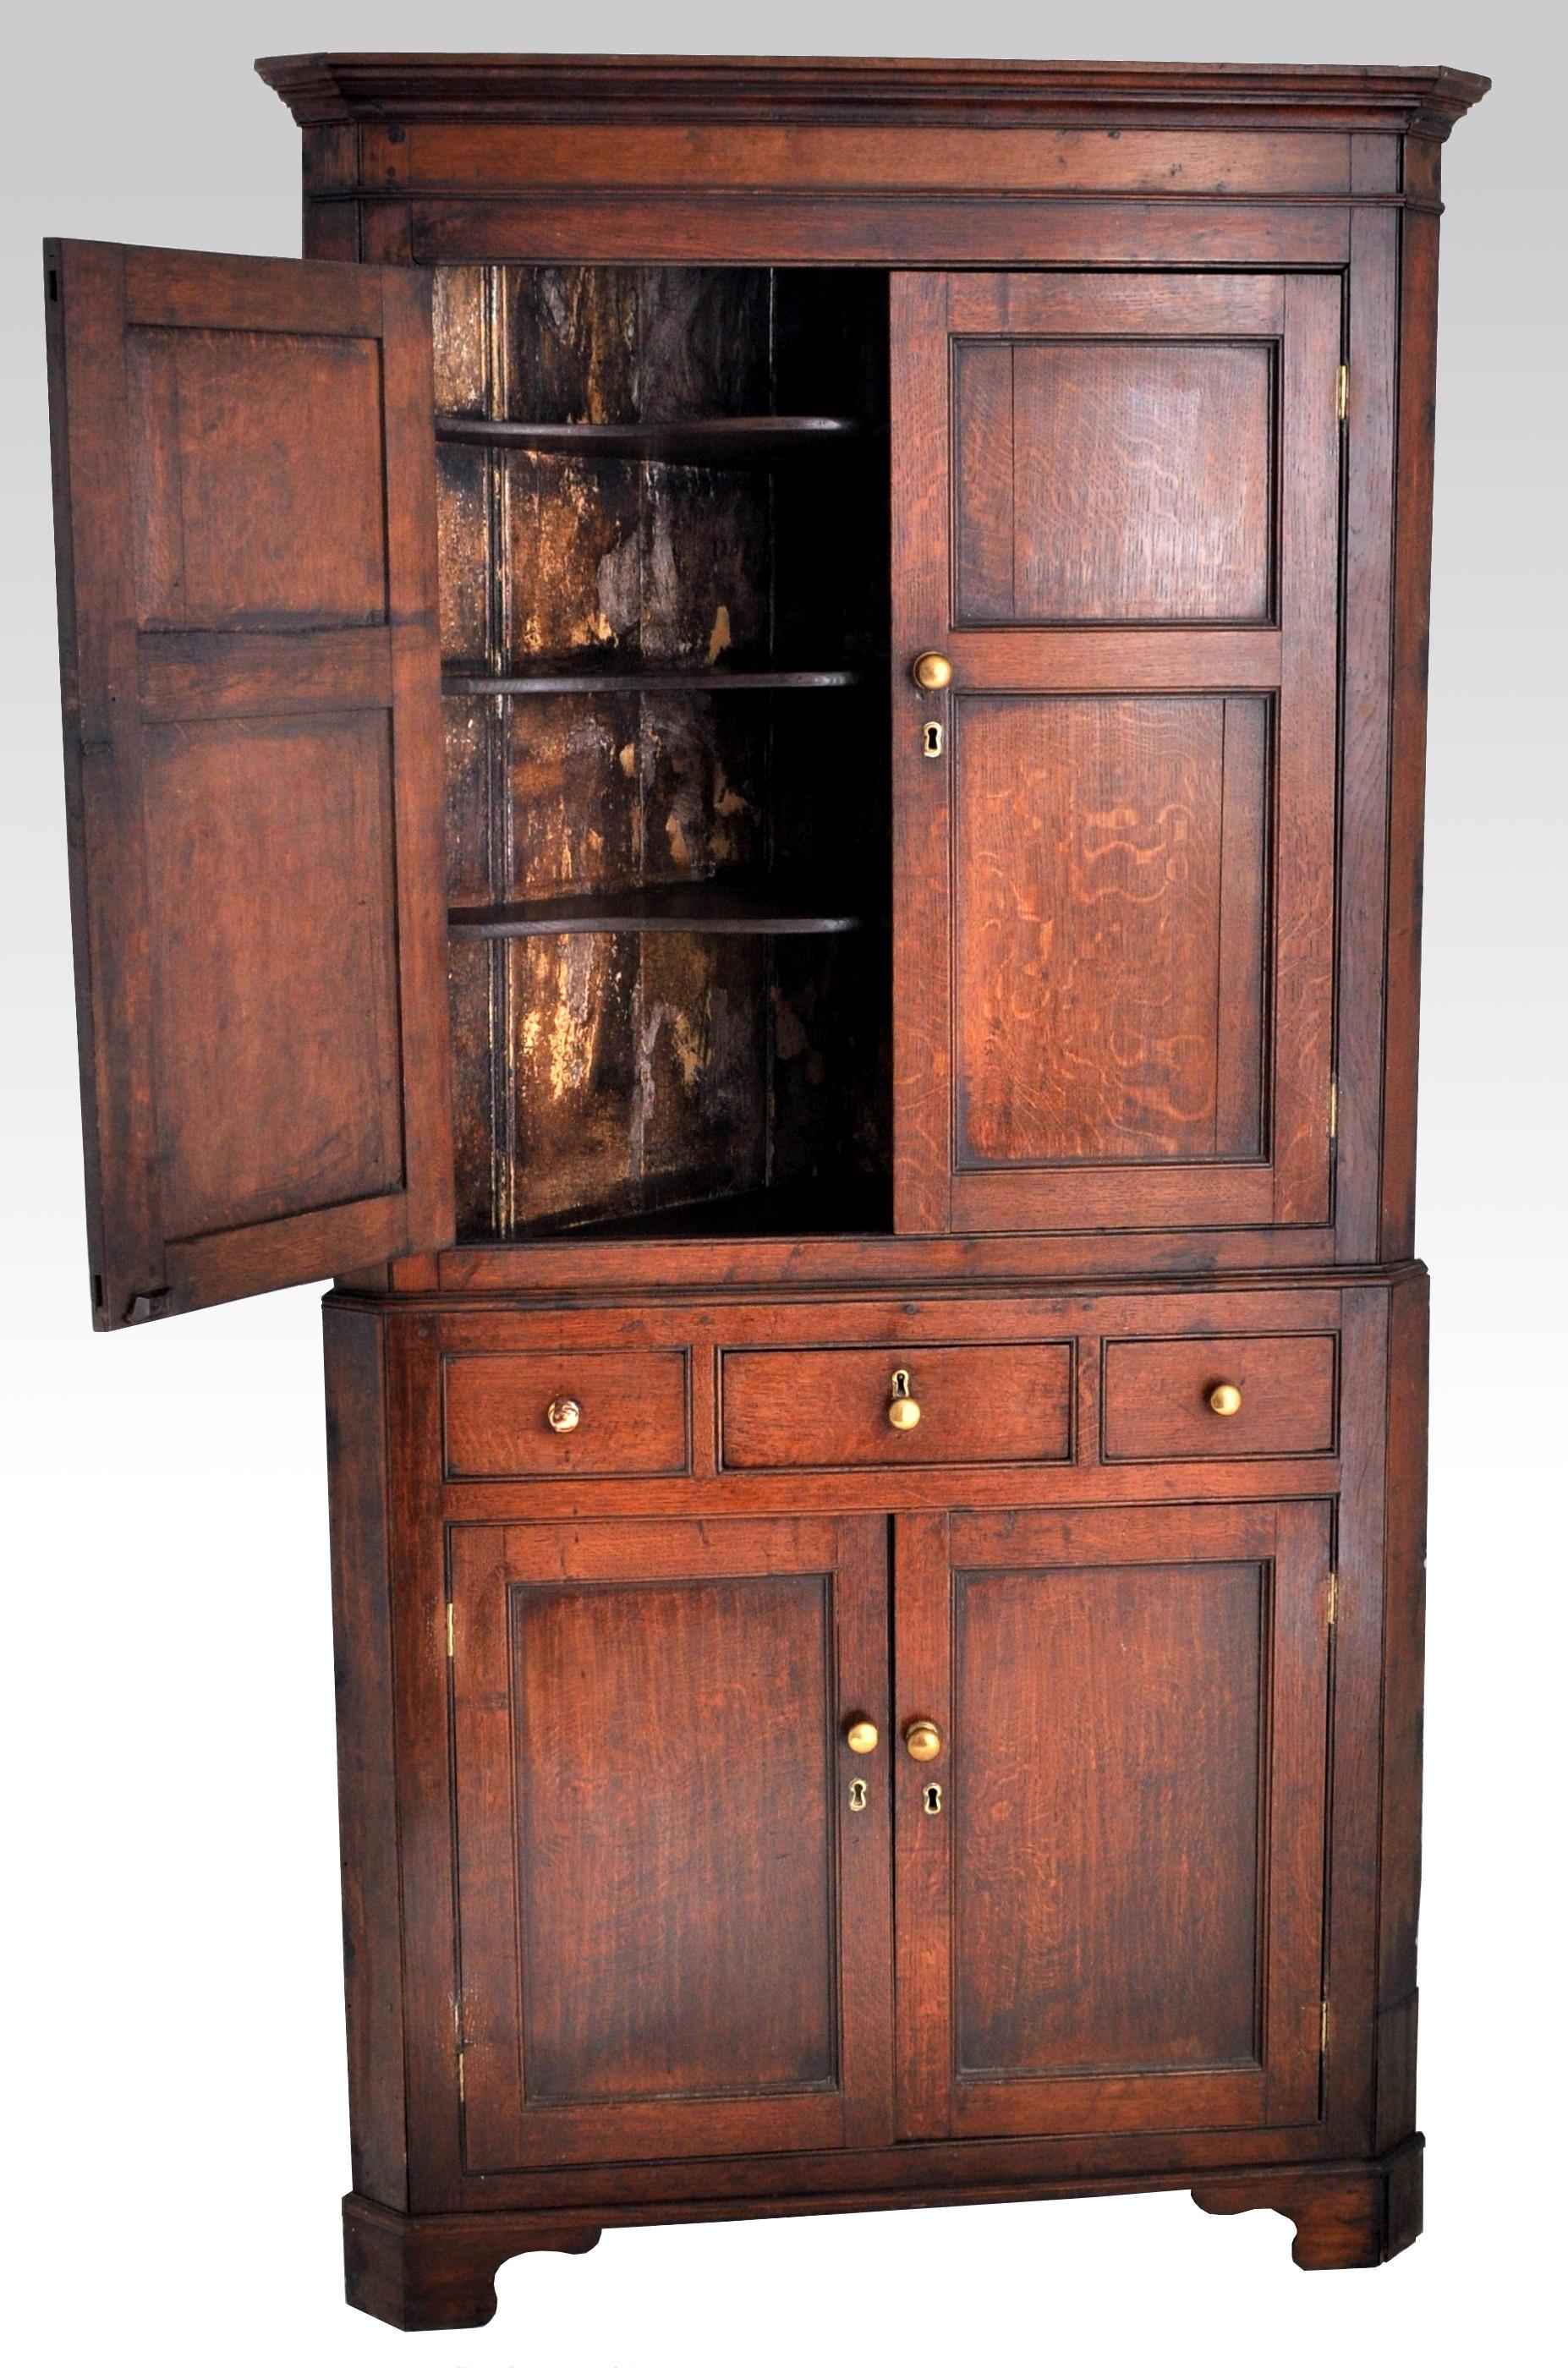 Antique English Georgian George III oak corner cabinet, circa 1780. The cabinet in two sections and having a stepped crown to the top, the top section having twin fielded paneled doors and enclosing three shaped shelves. The base having a central